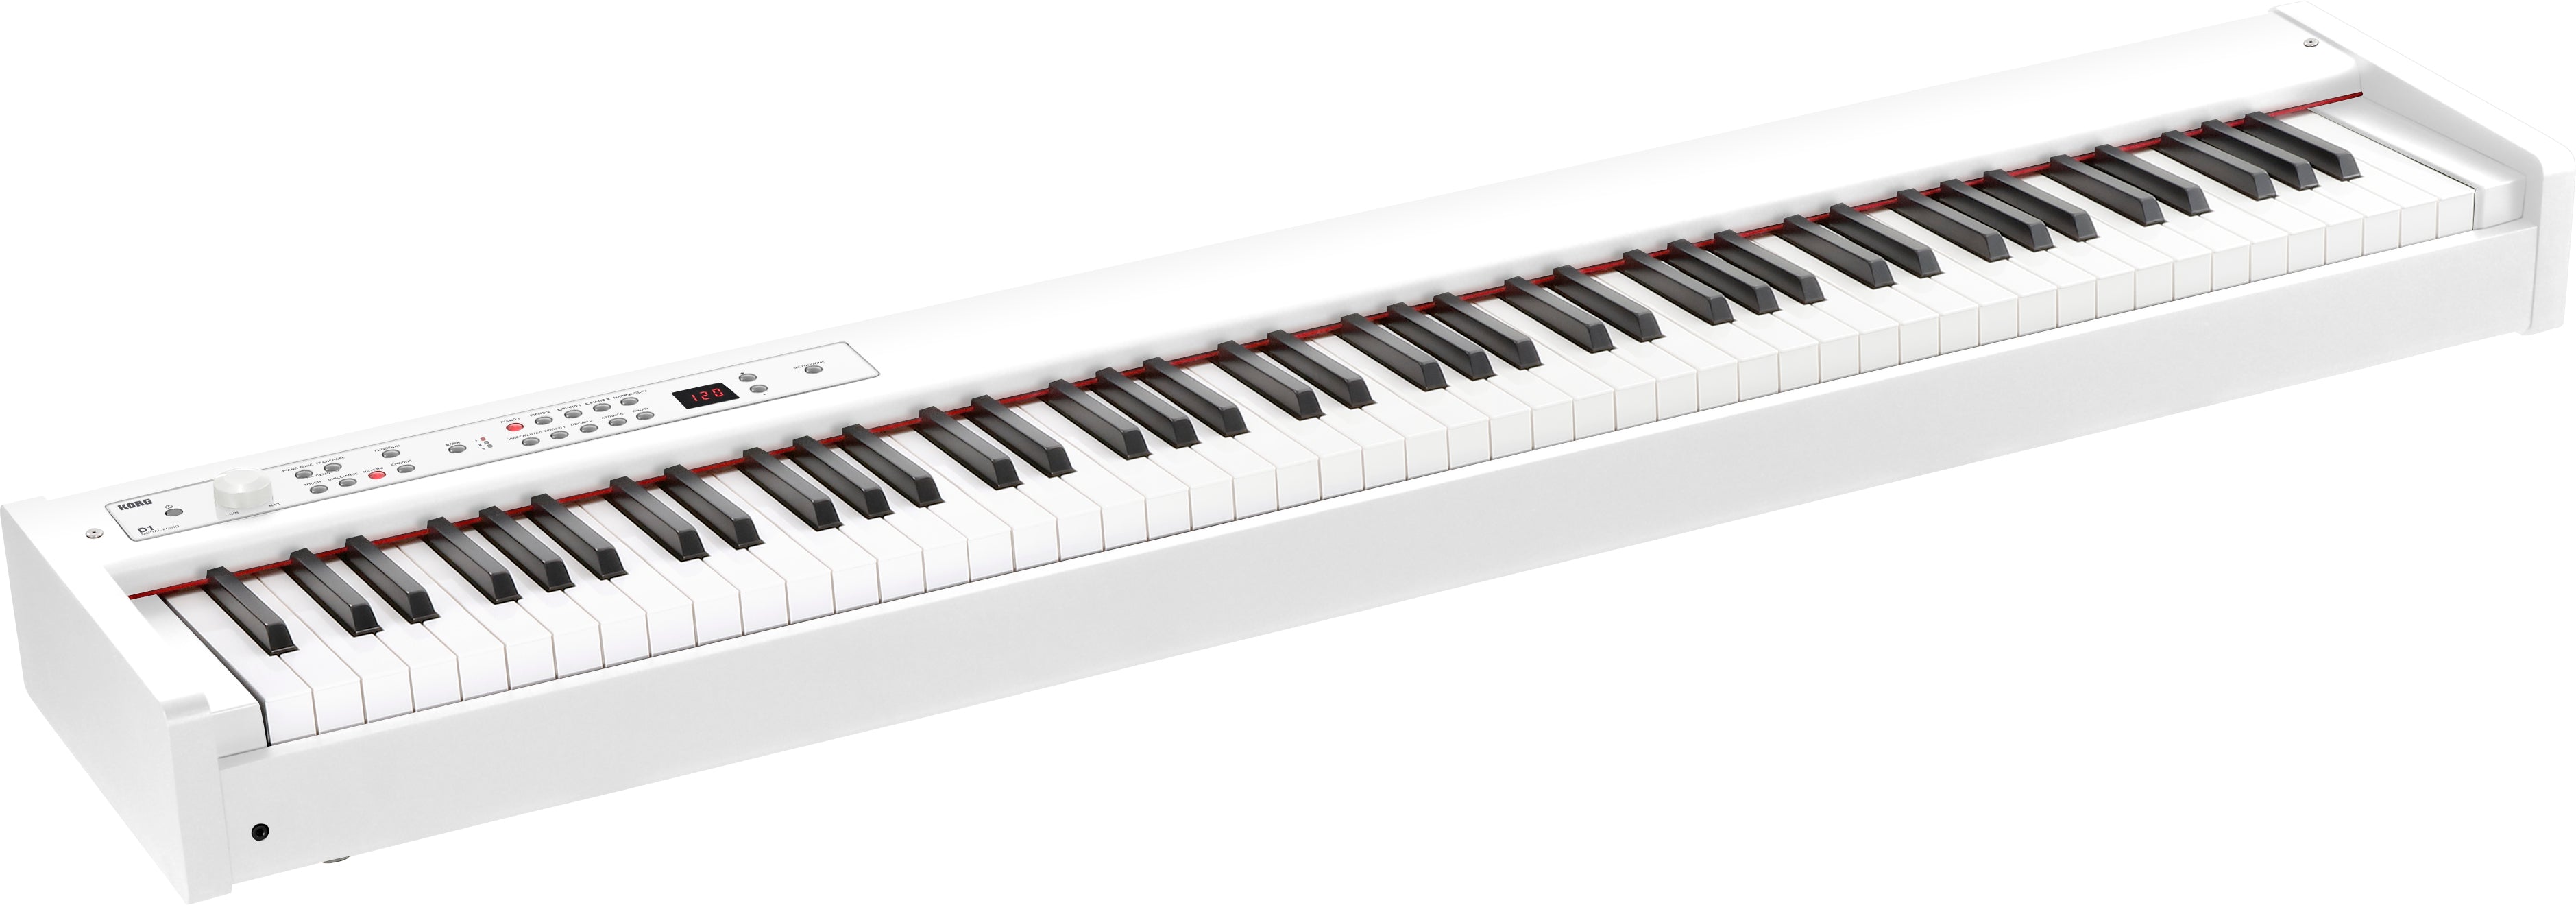 D1 Stage Piano - White (Certified Refurbished)